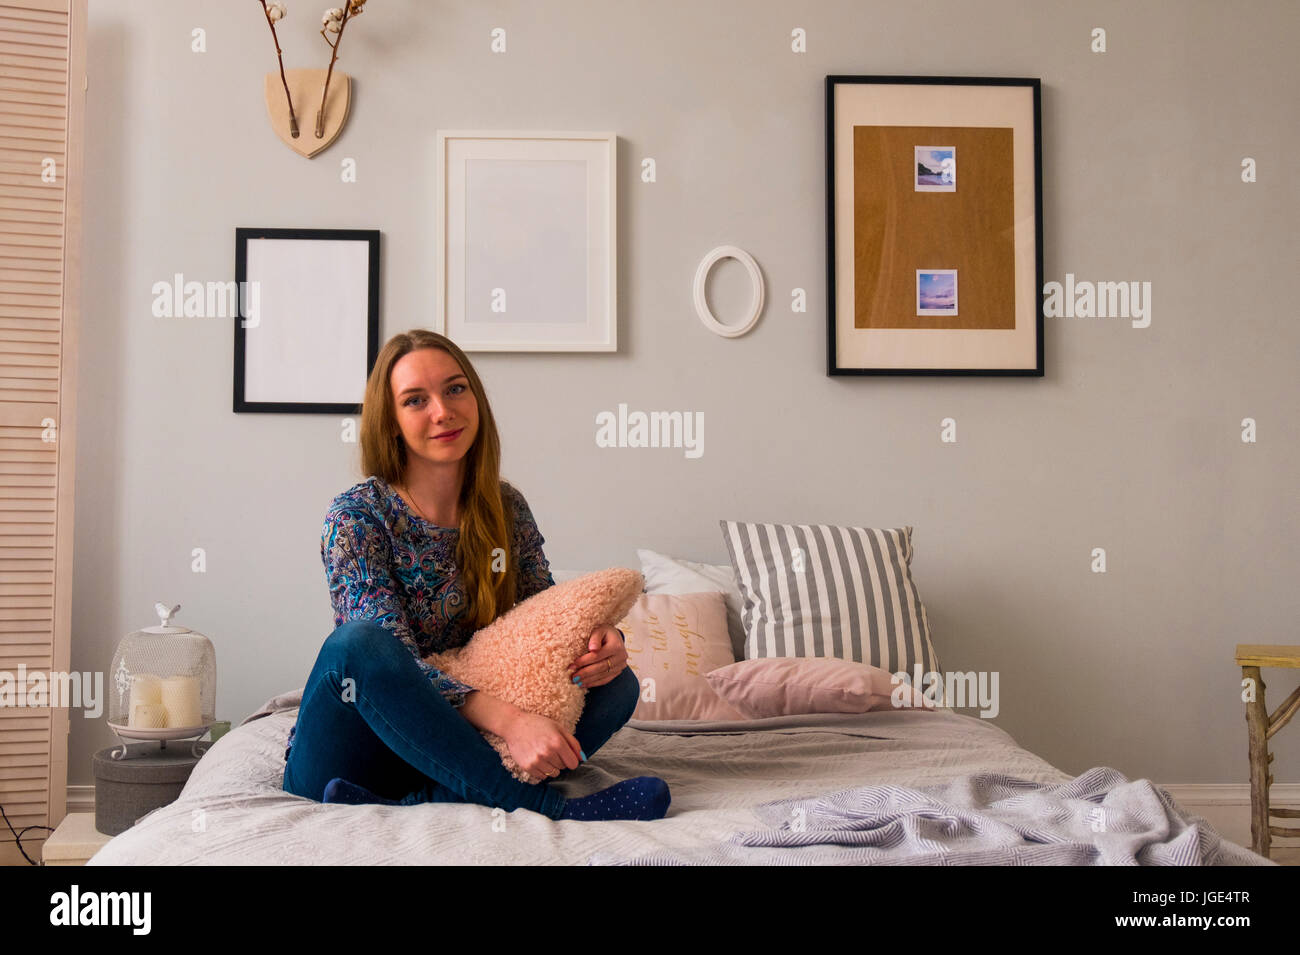 Portrait of smiling Caucasian woman sitting on bed Stock Photo